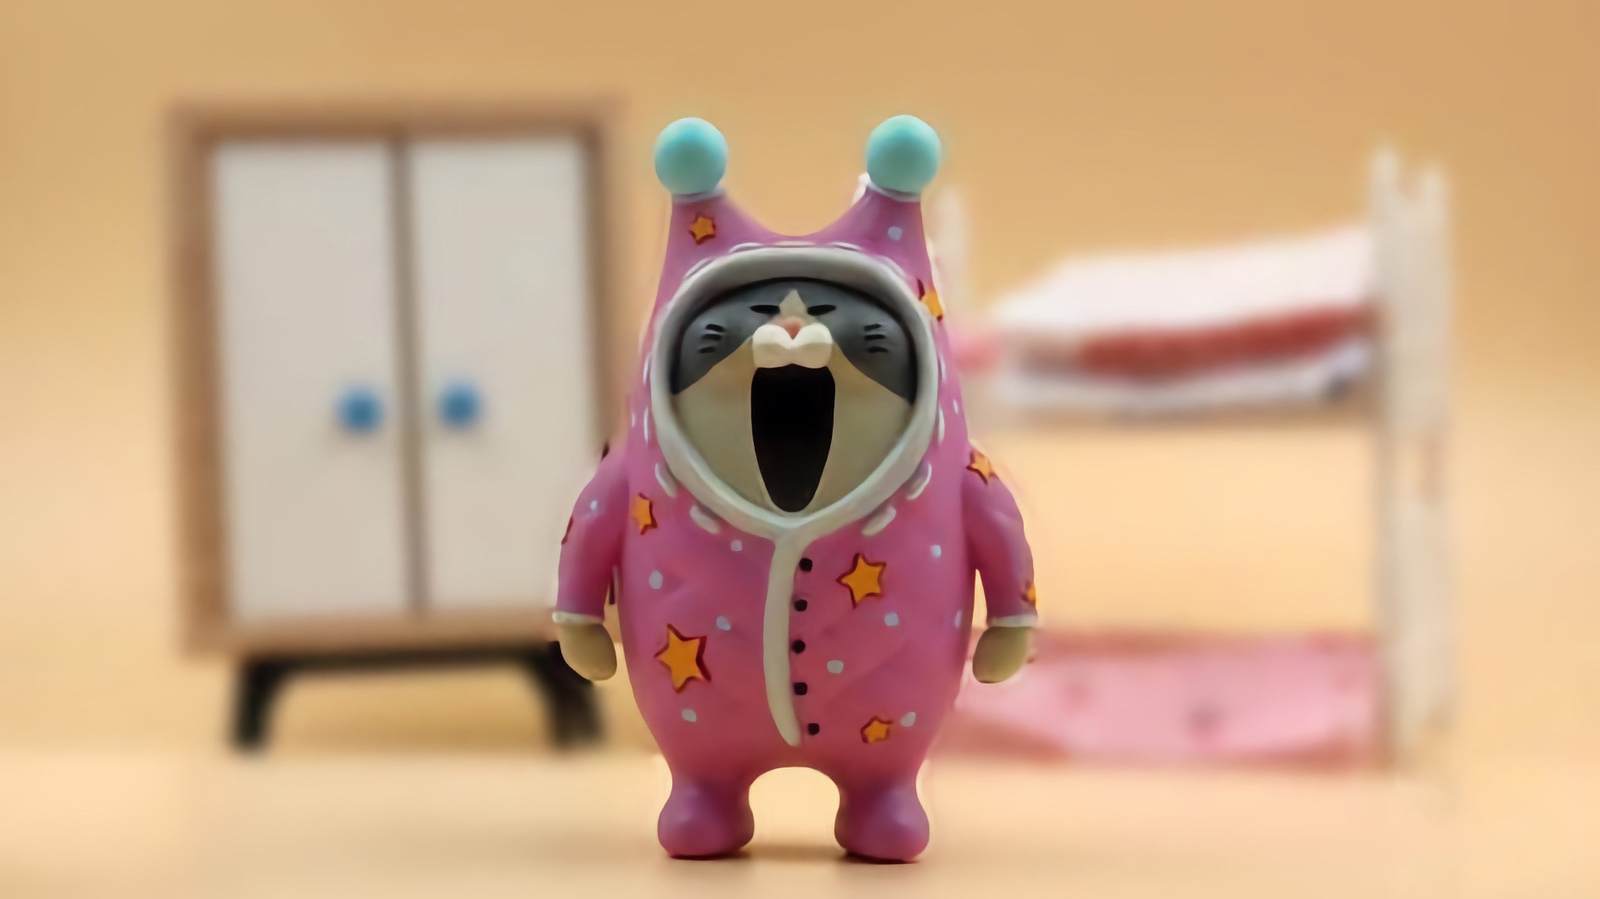 You are currently viewing Laughing Mouth Cat – Sleepy by Wellson Ho